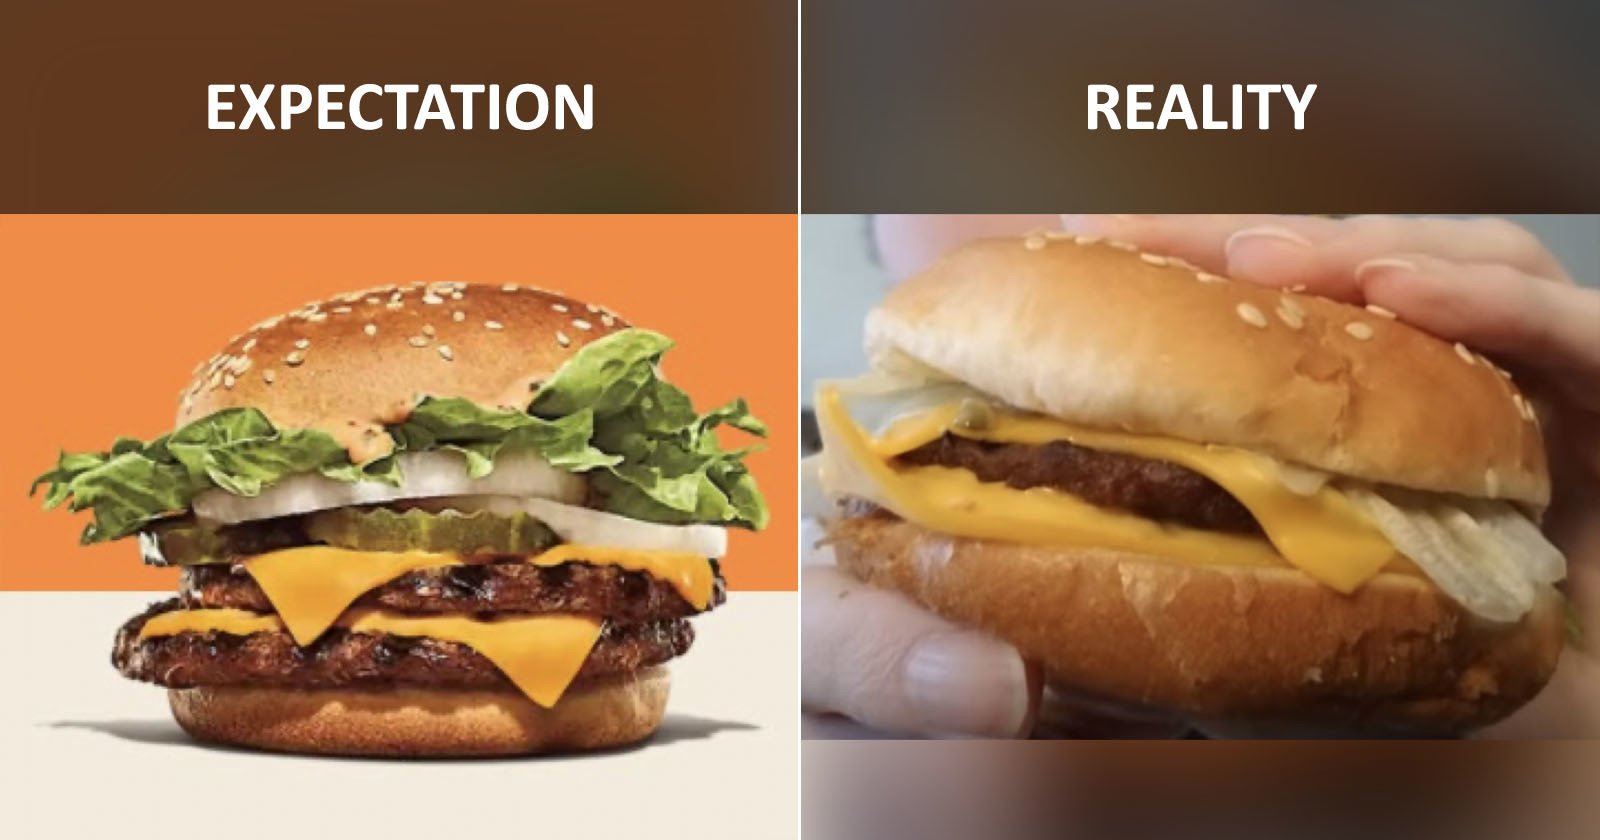  burger king sued over misleading photos its burgers 